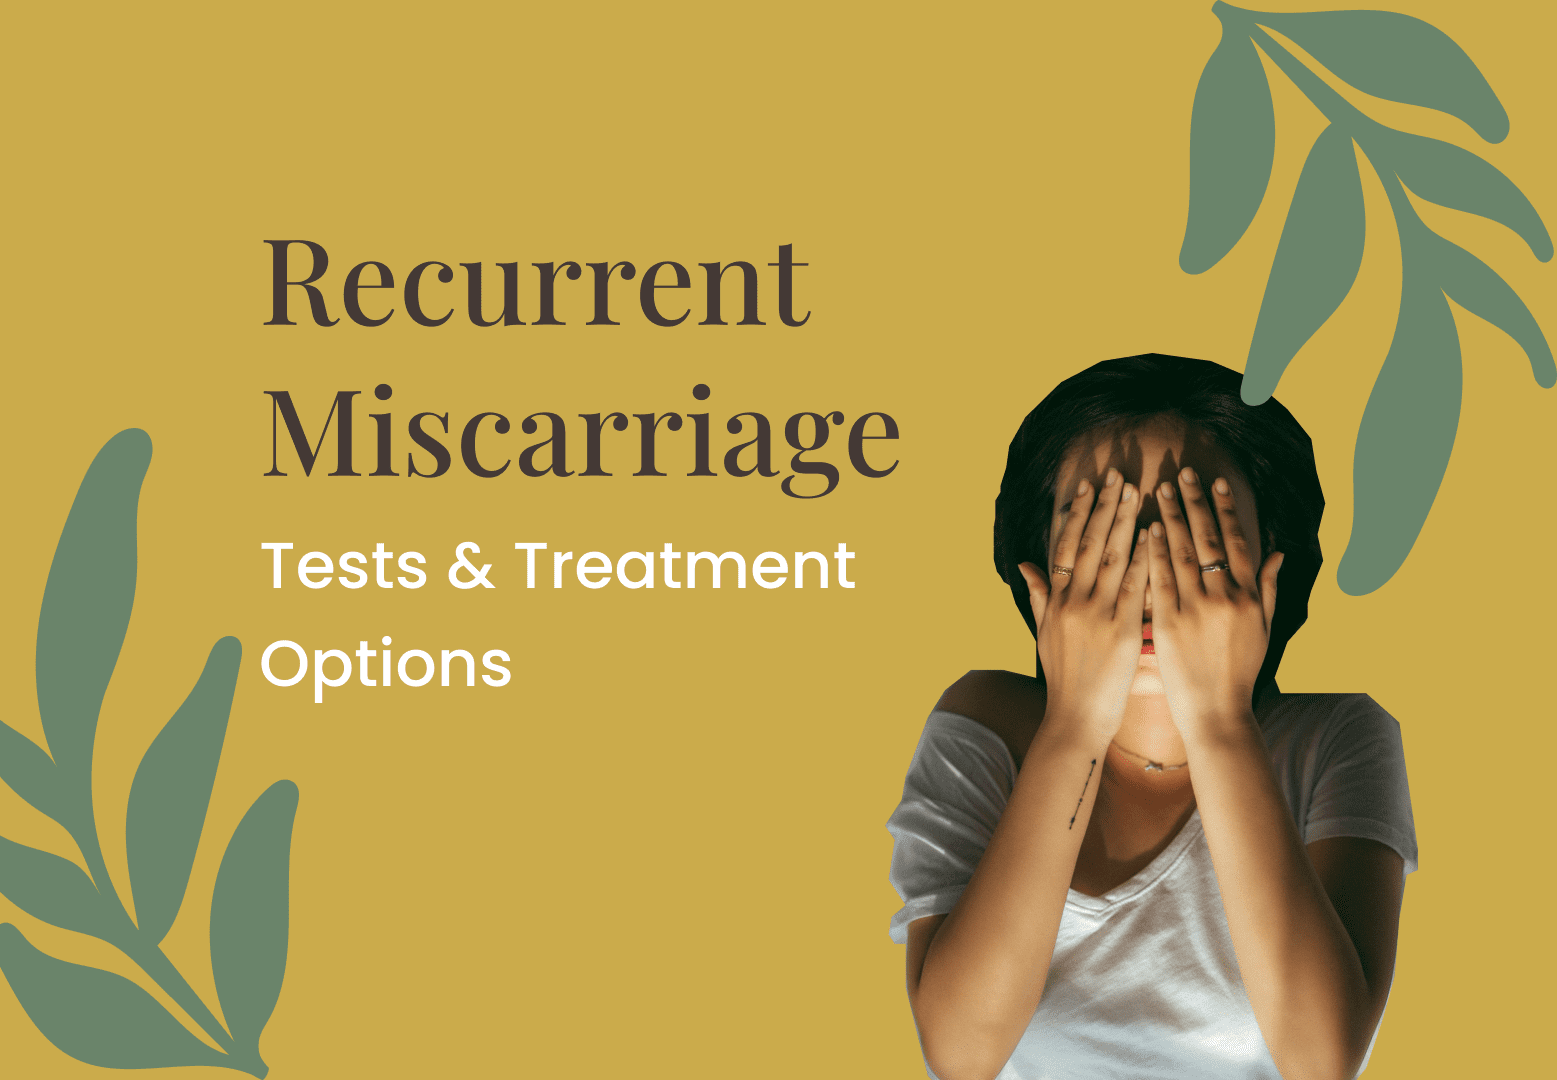 What to Do After Recurrent Miscarriage: Tests & Treatment Options